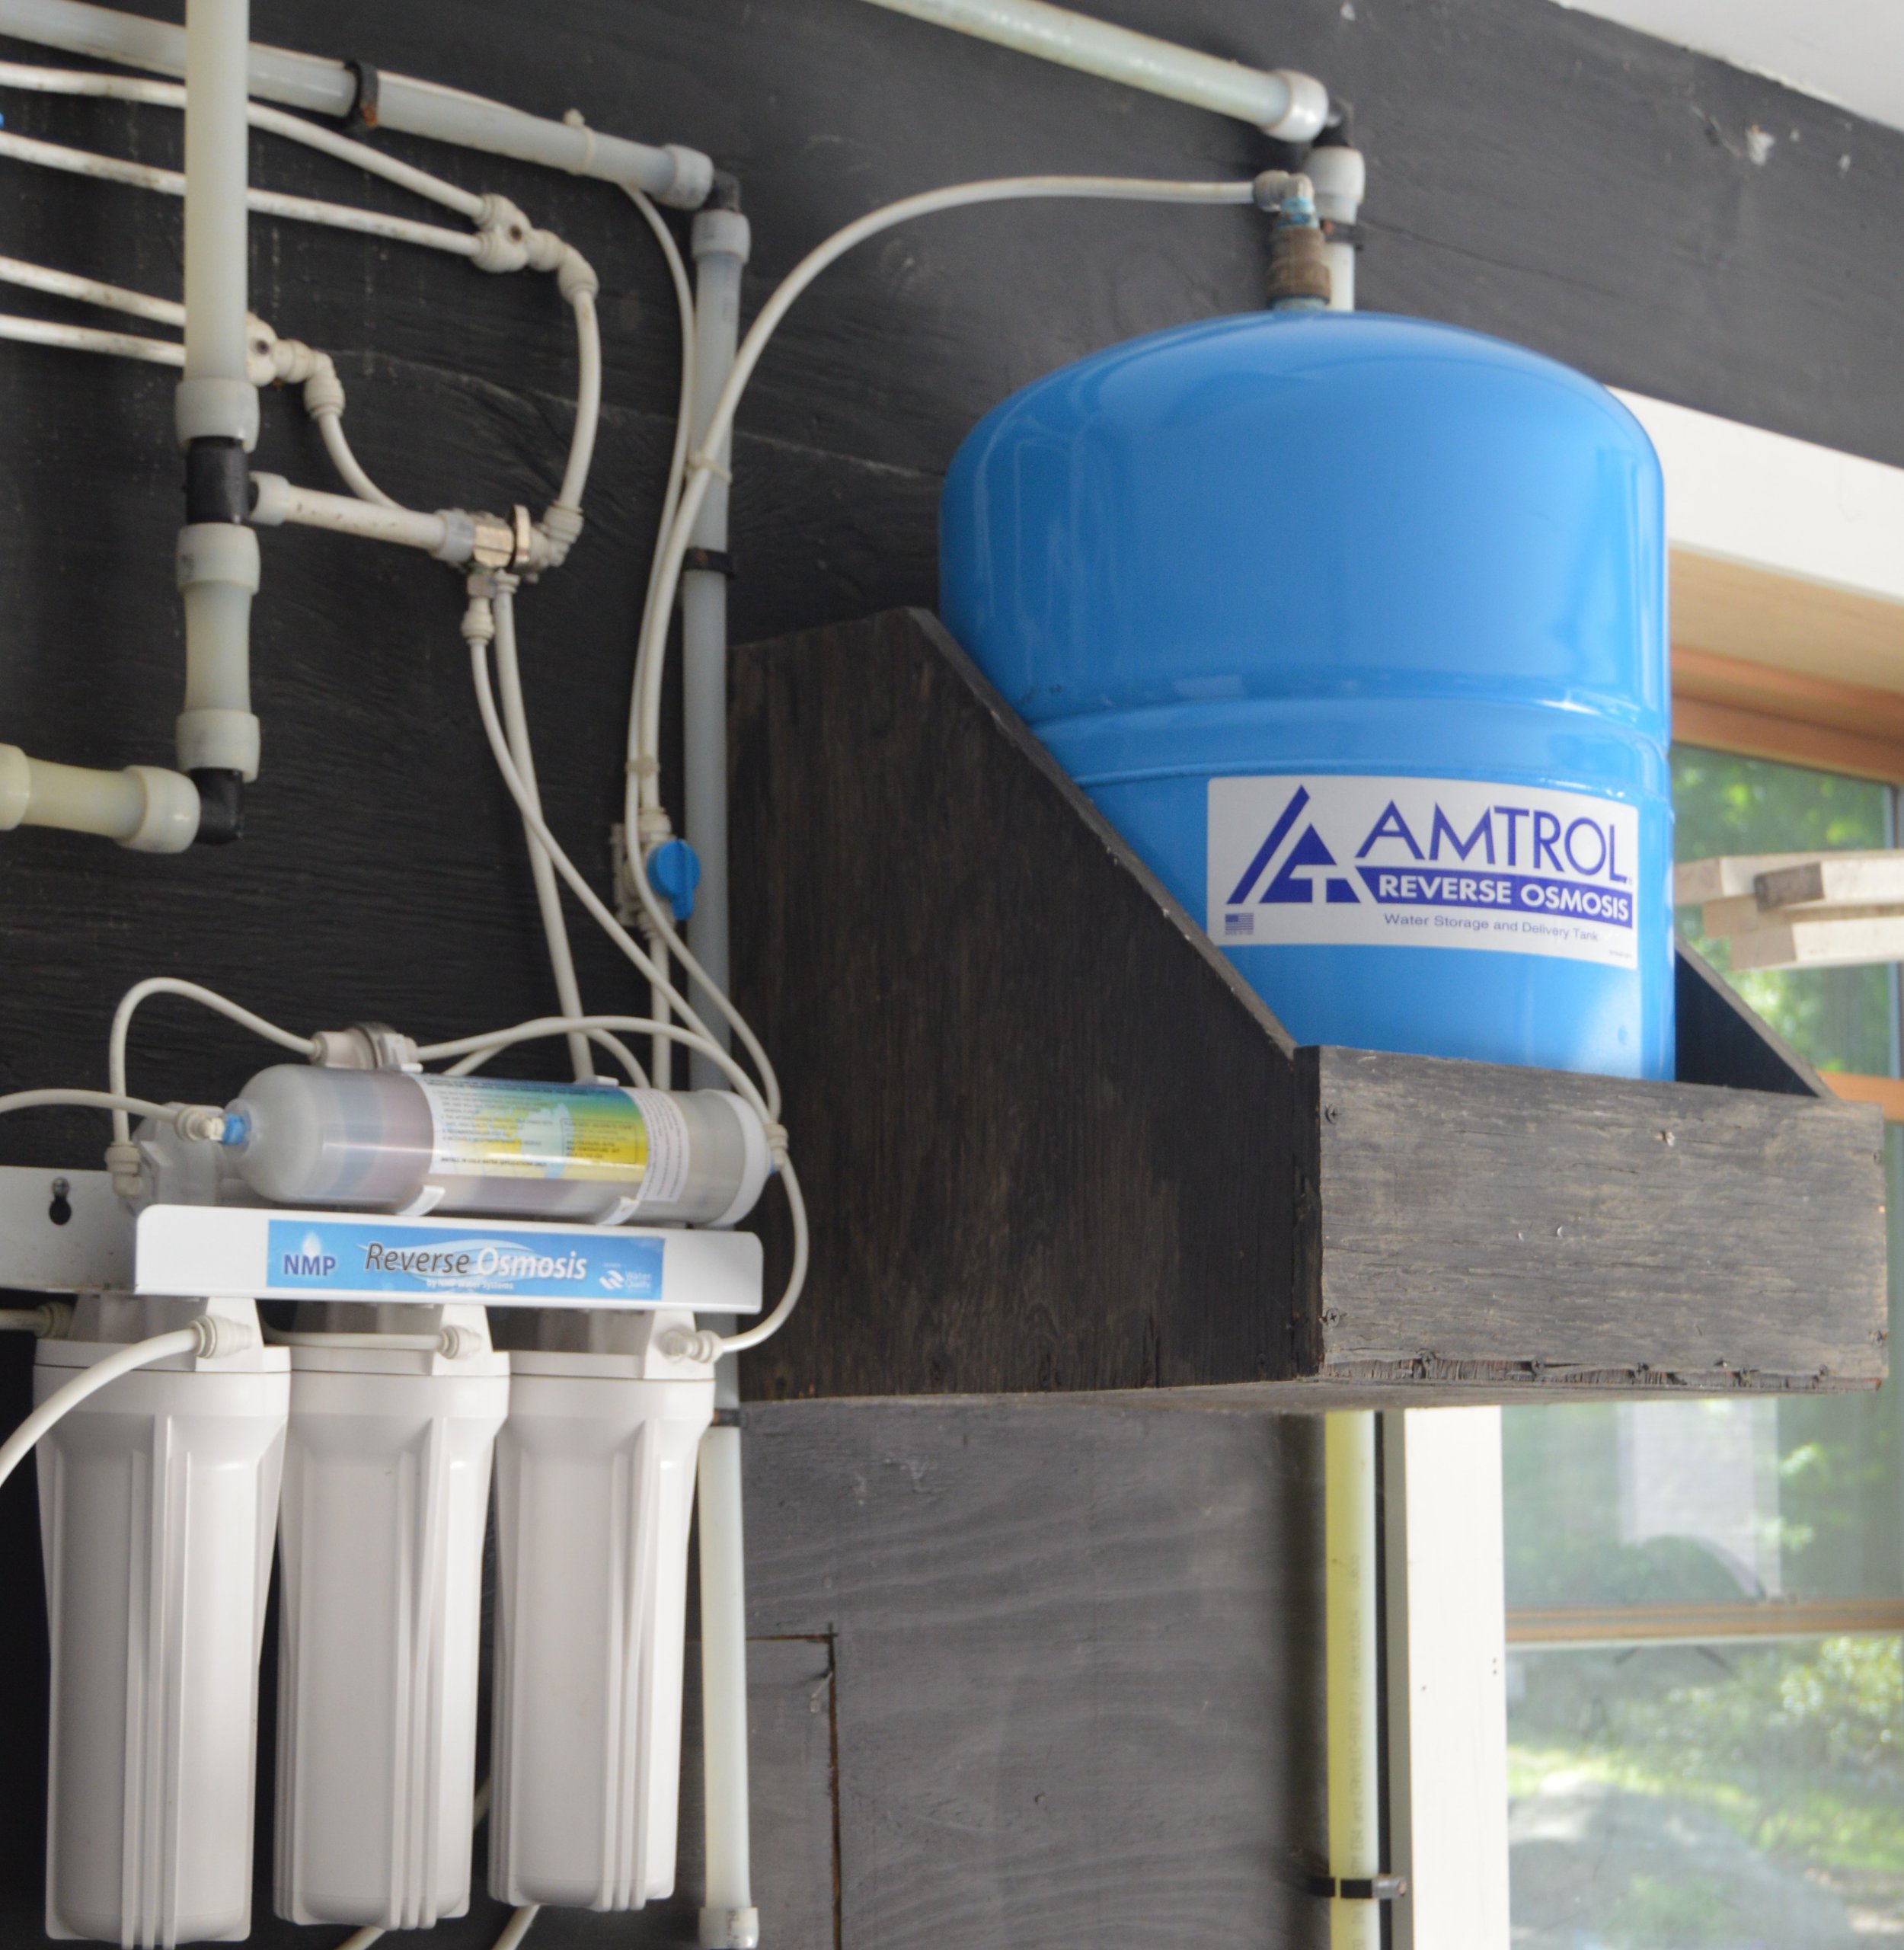 5 Stage Reverse Osmosis System with Amtrol Tank.JPG